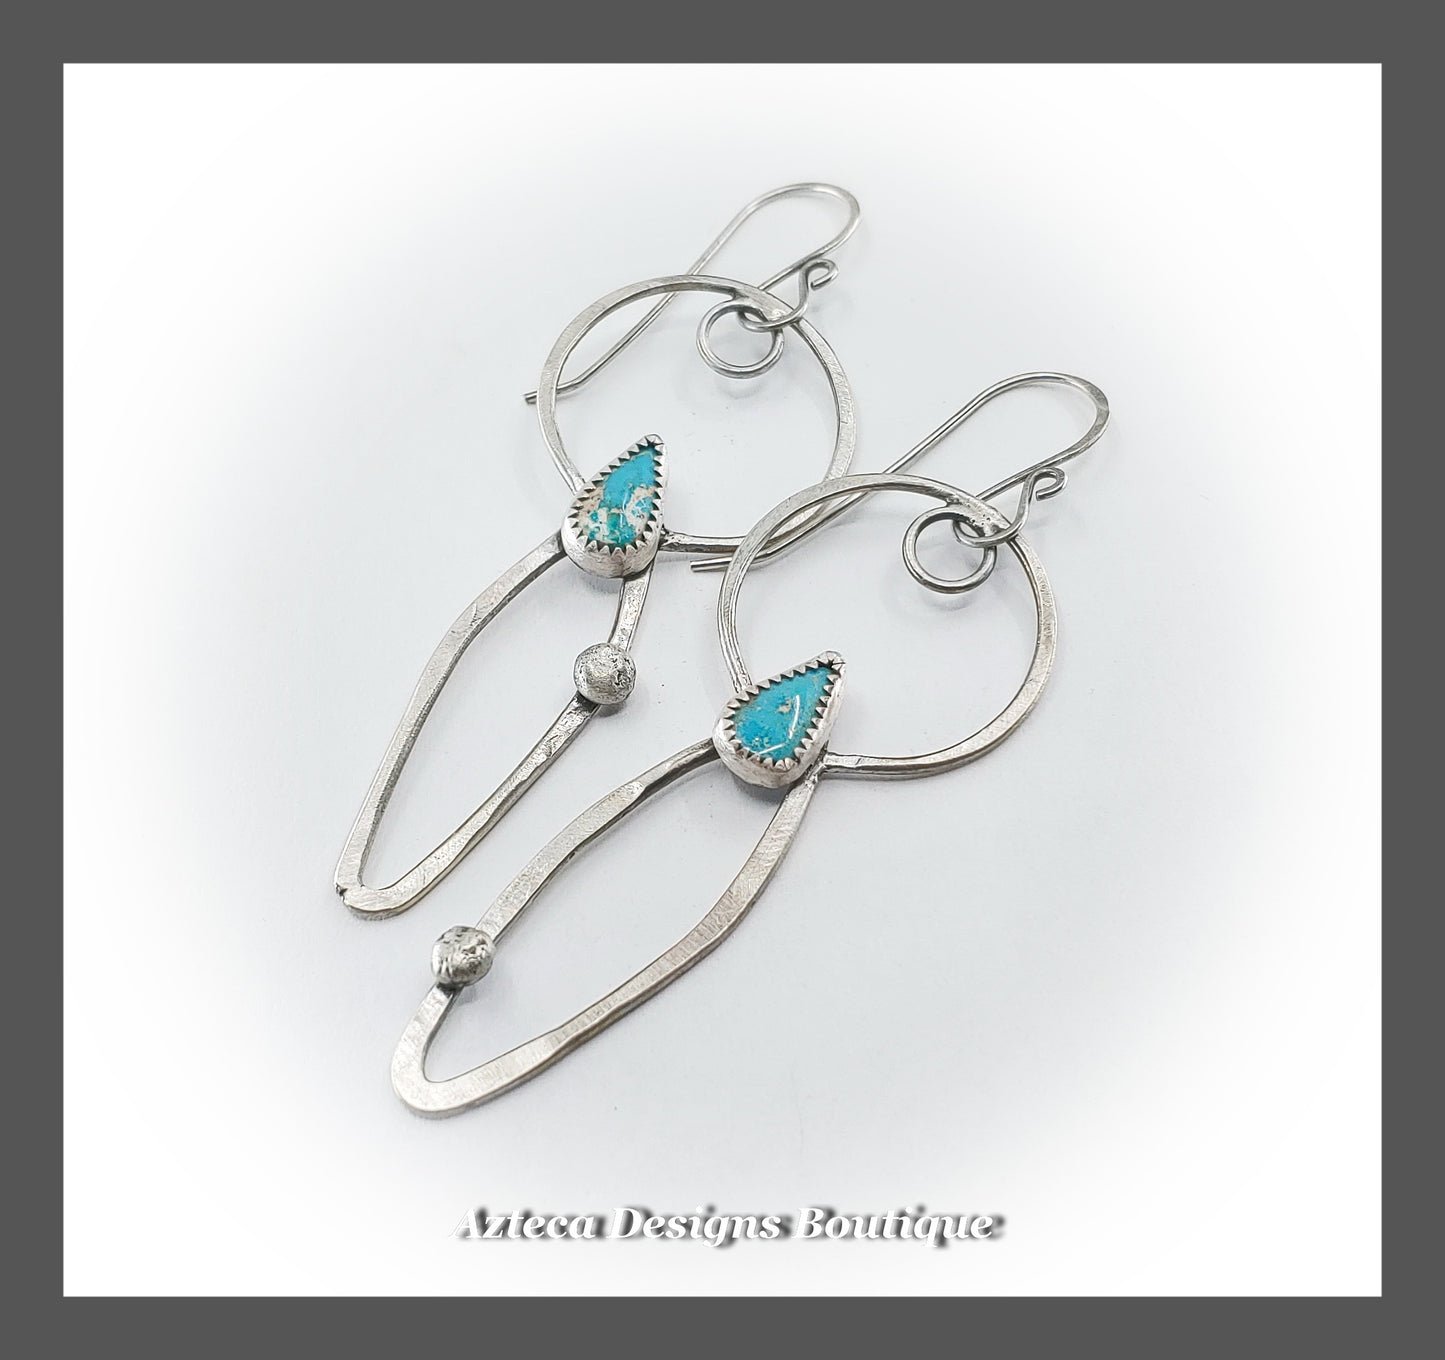 Natural Pinto Valley Turquoise + Argentium Silver Earrings